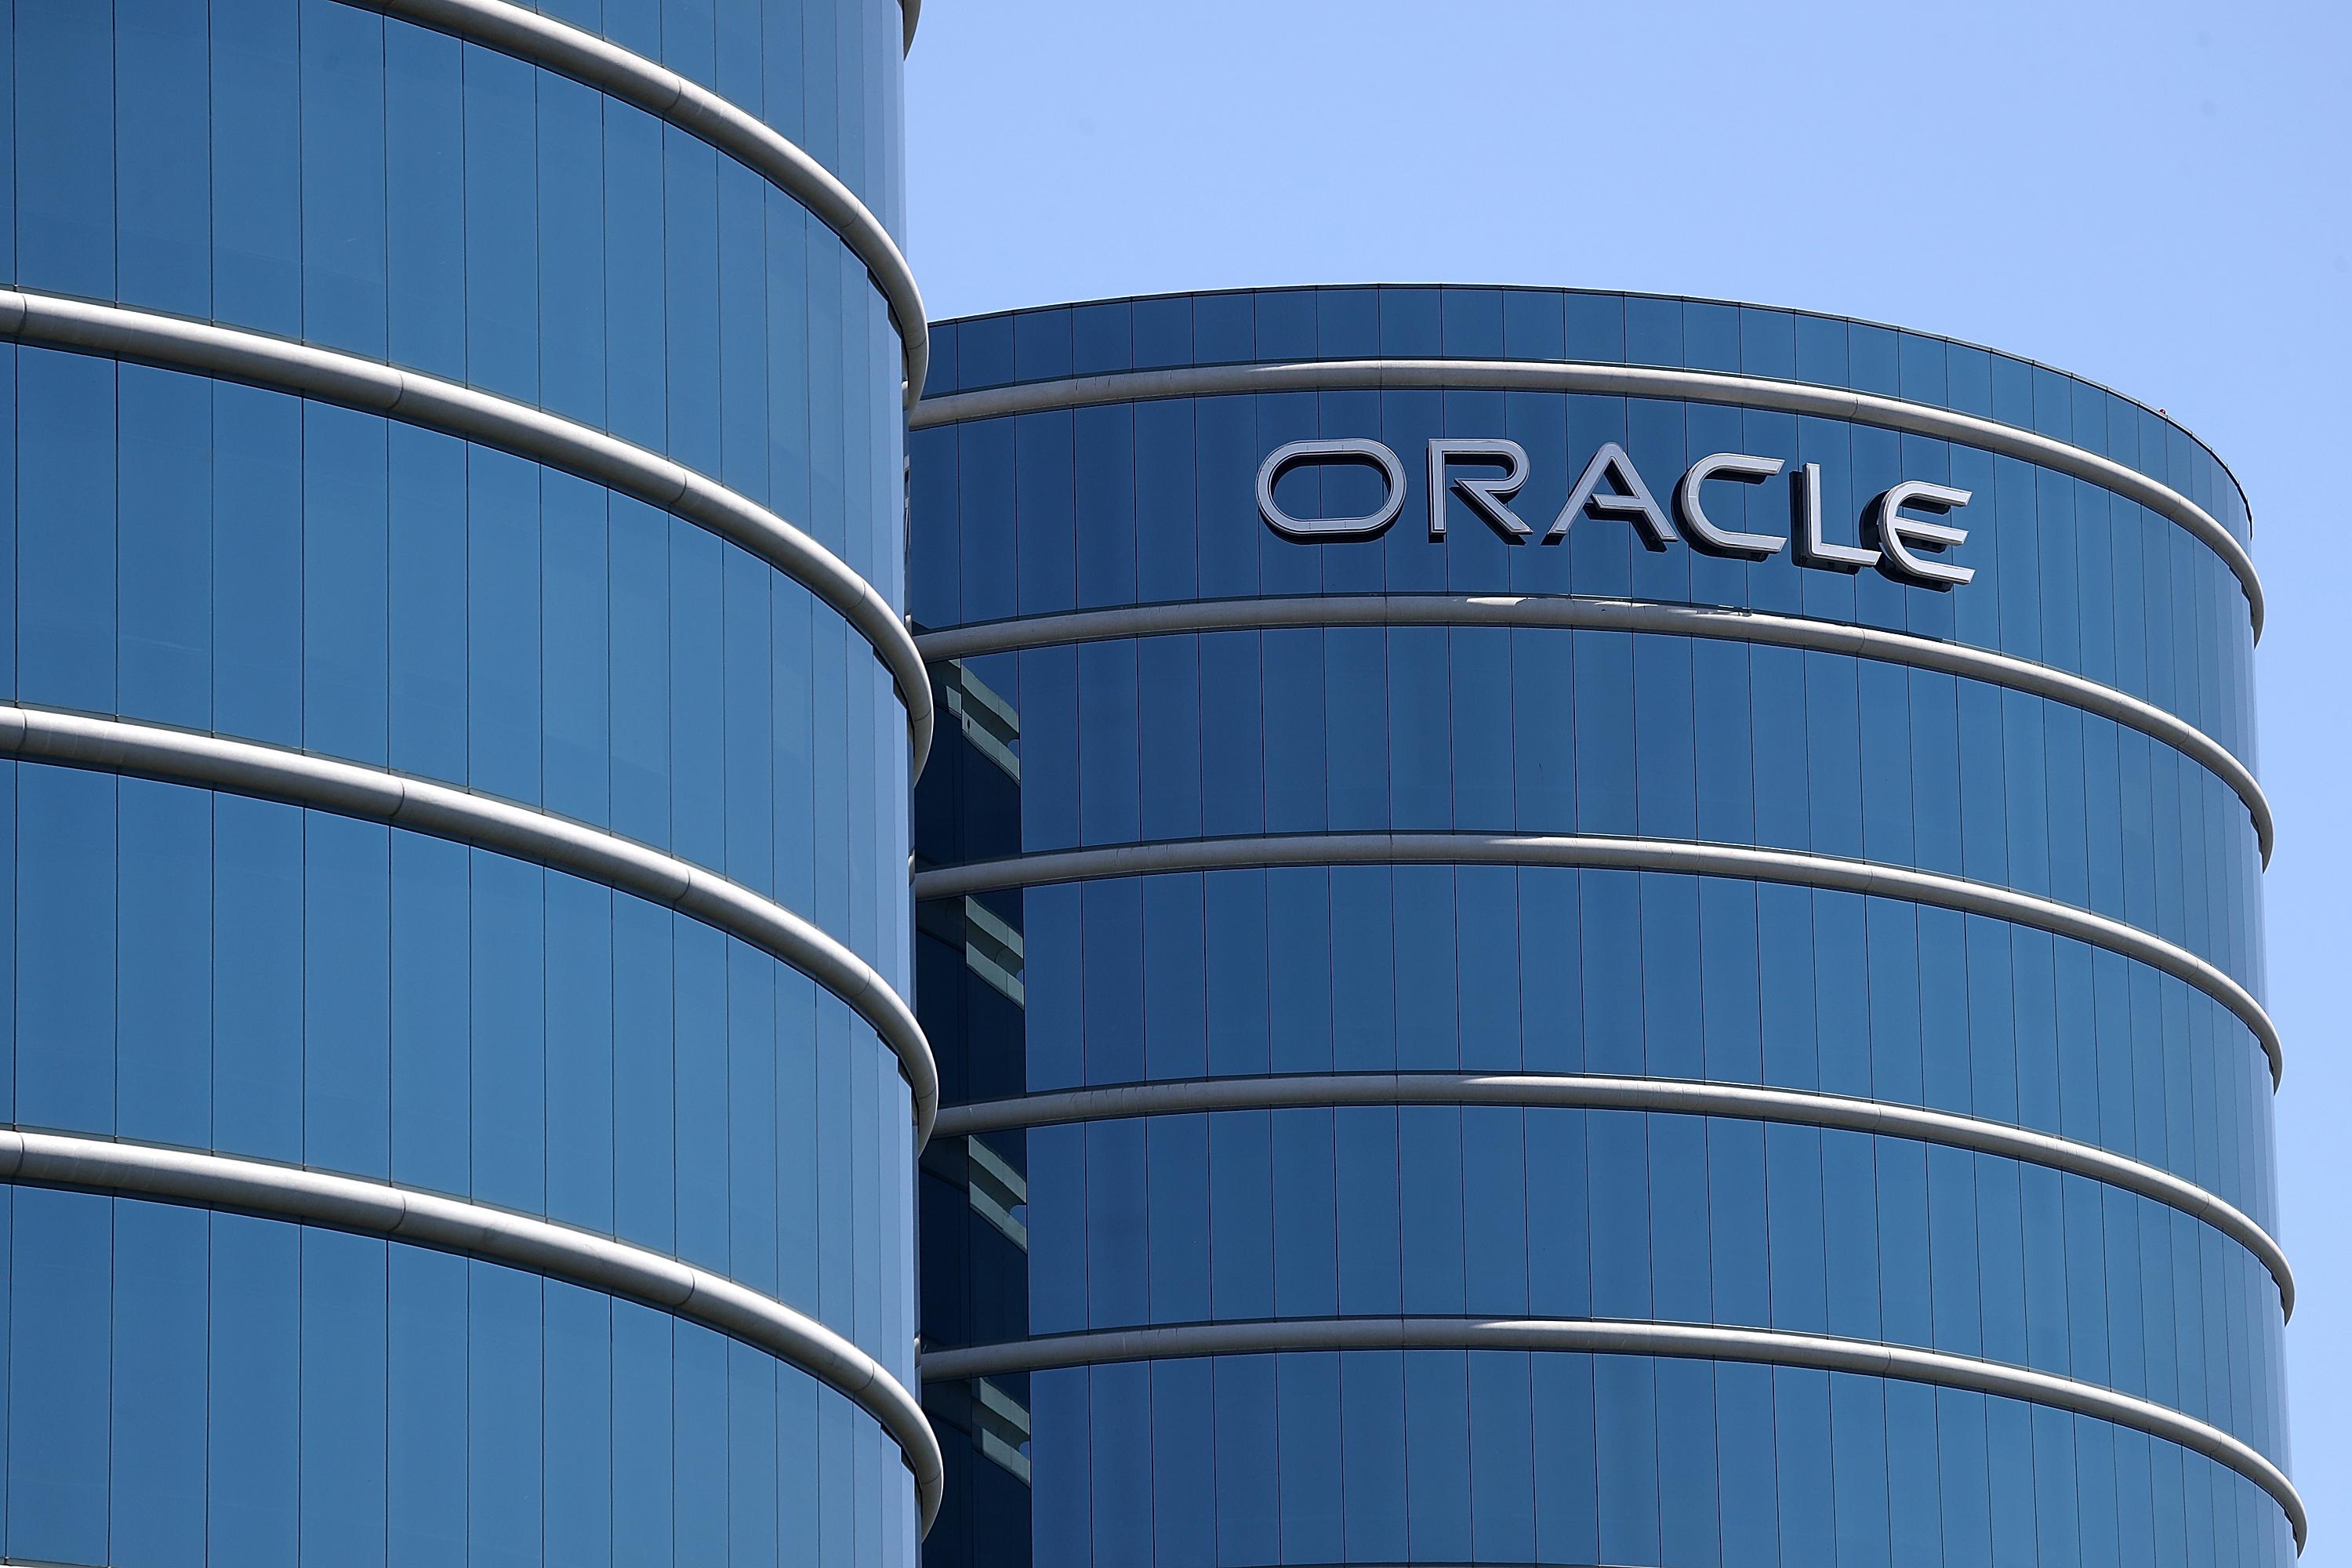 A view of Oracle headquarters in Redwood Shores, California.